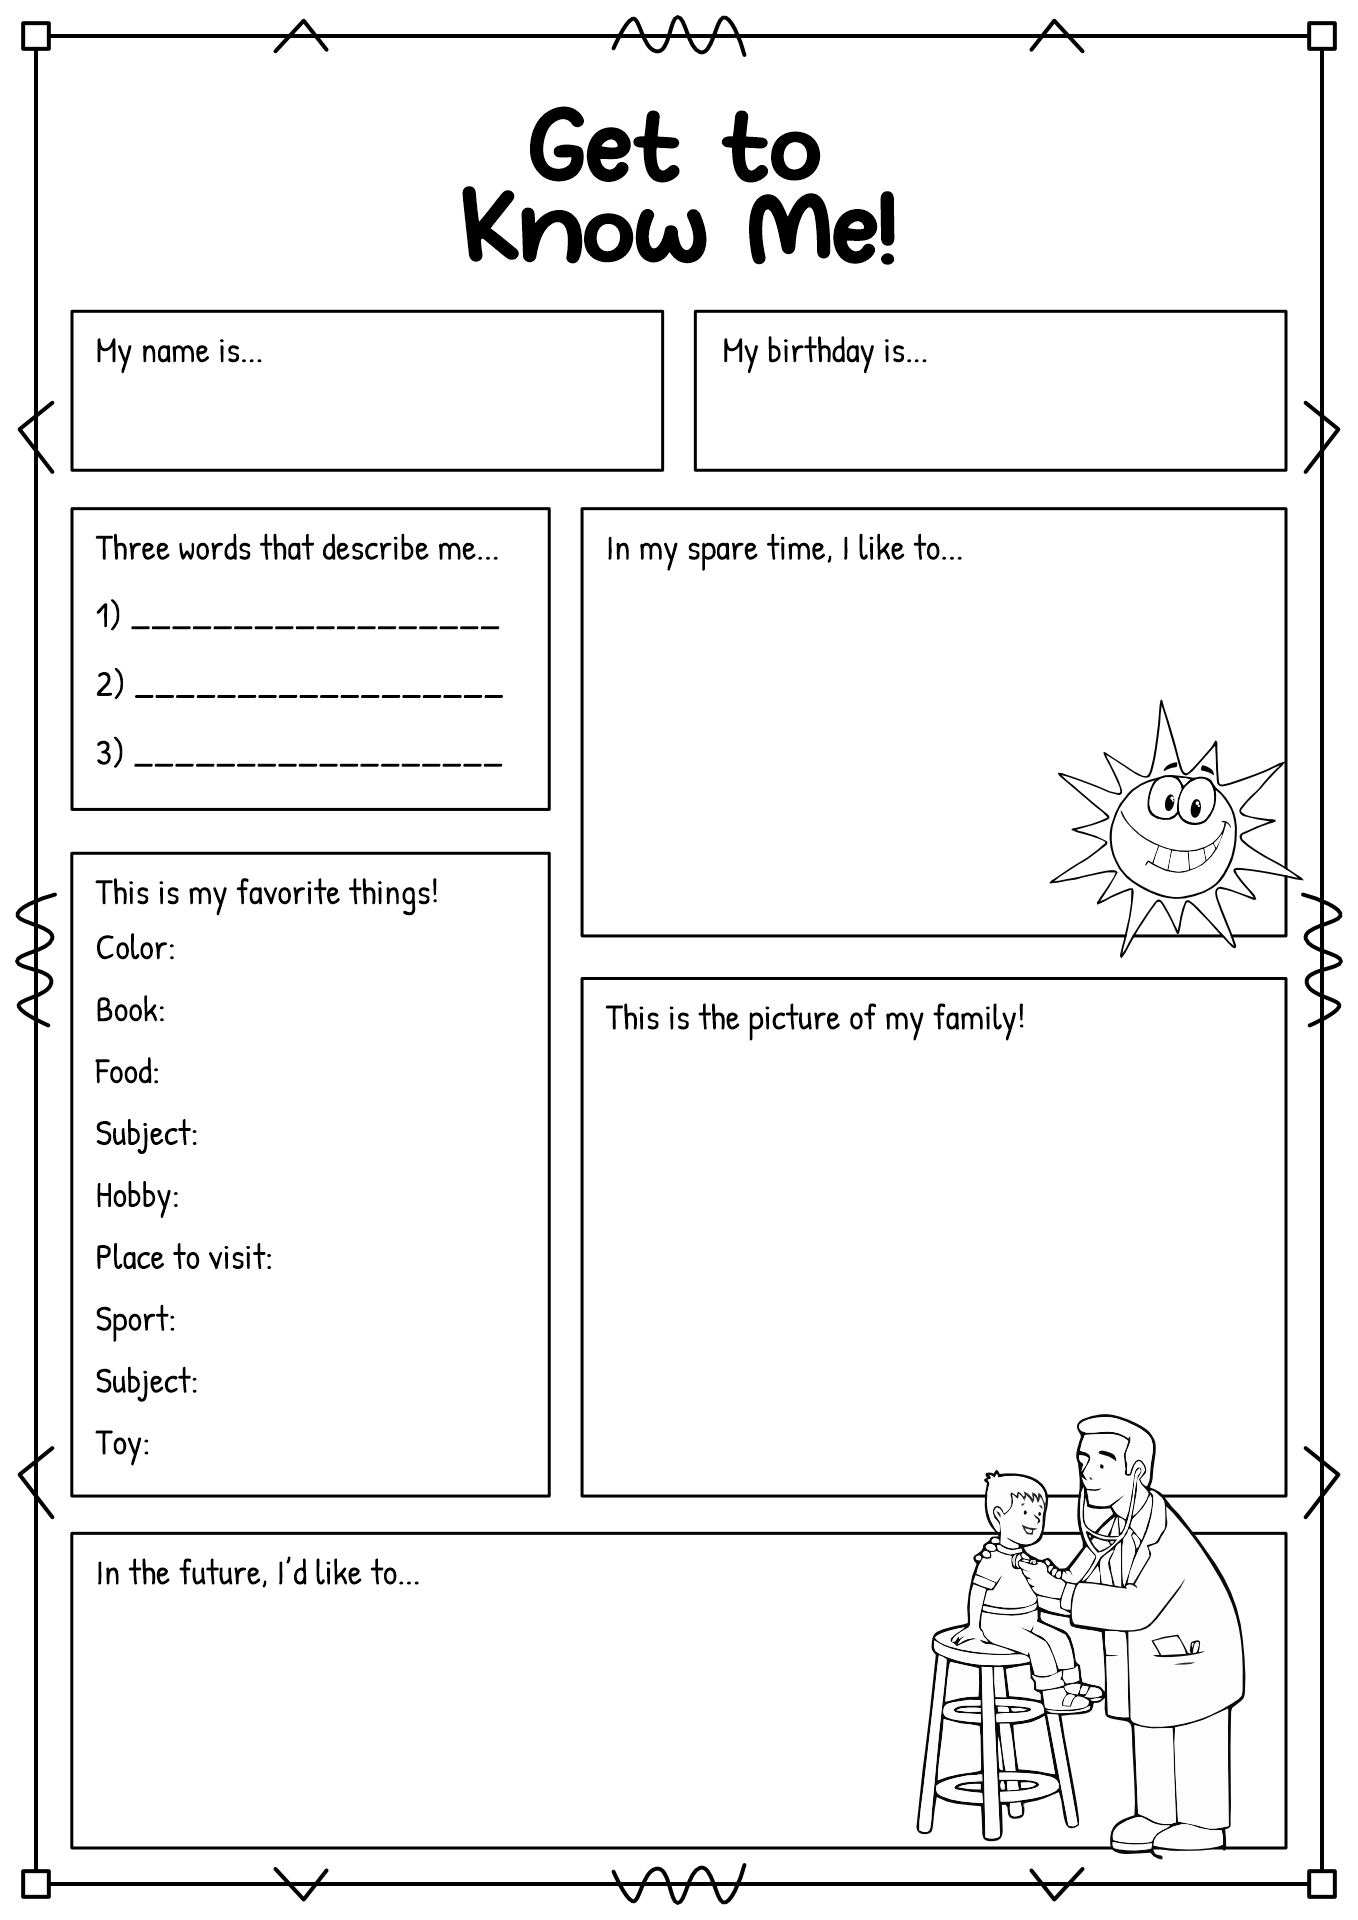 Get to Know You Worksheet